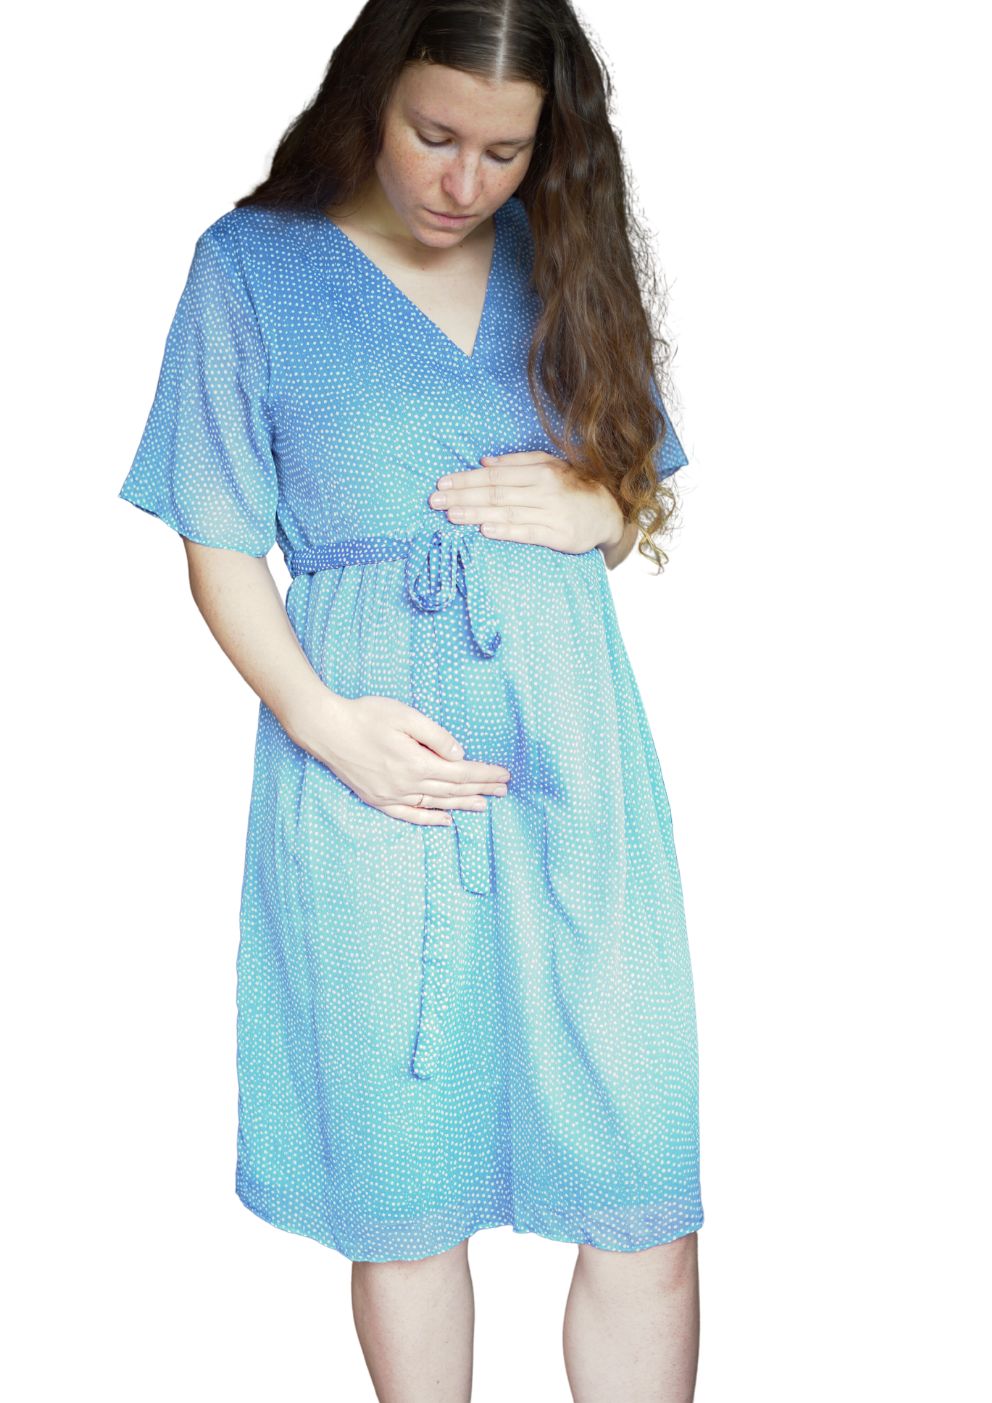 Glamorous Bloom blue maternity dress with dots